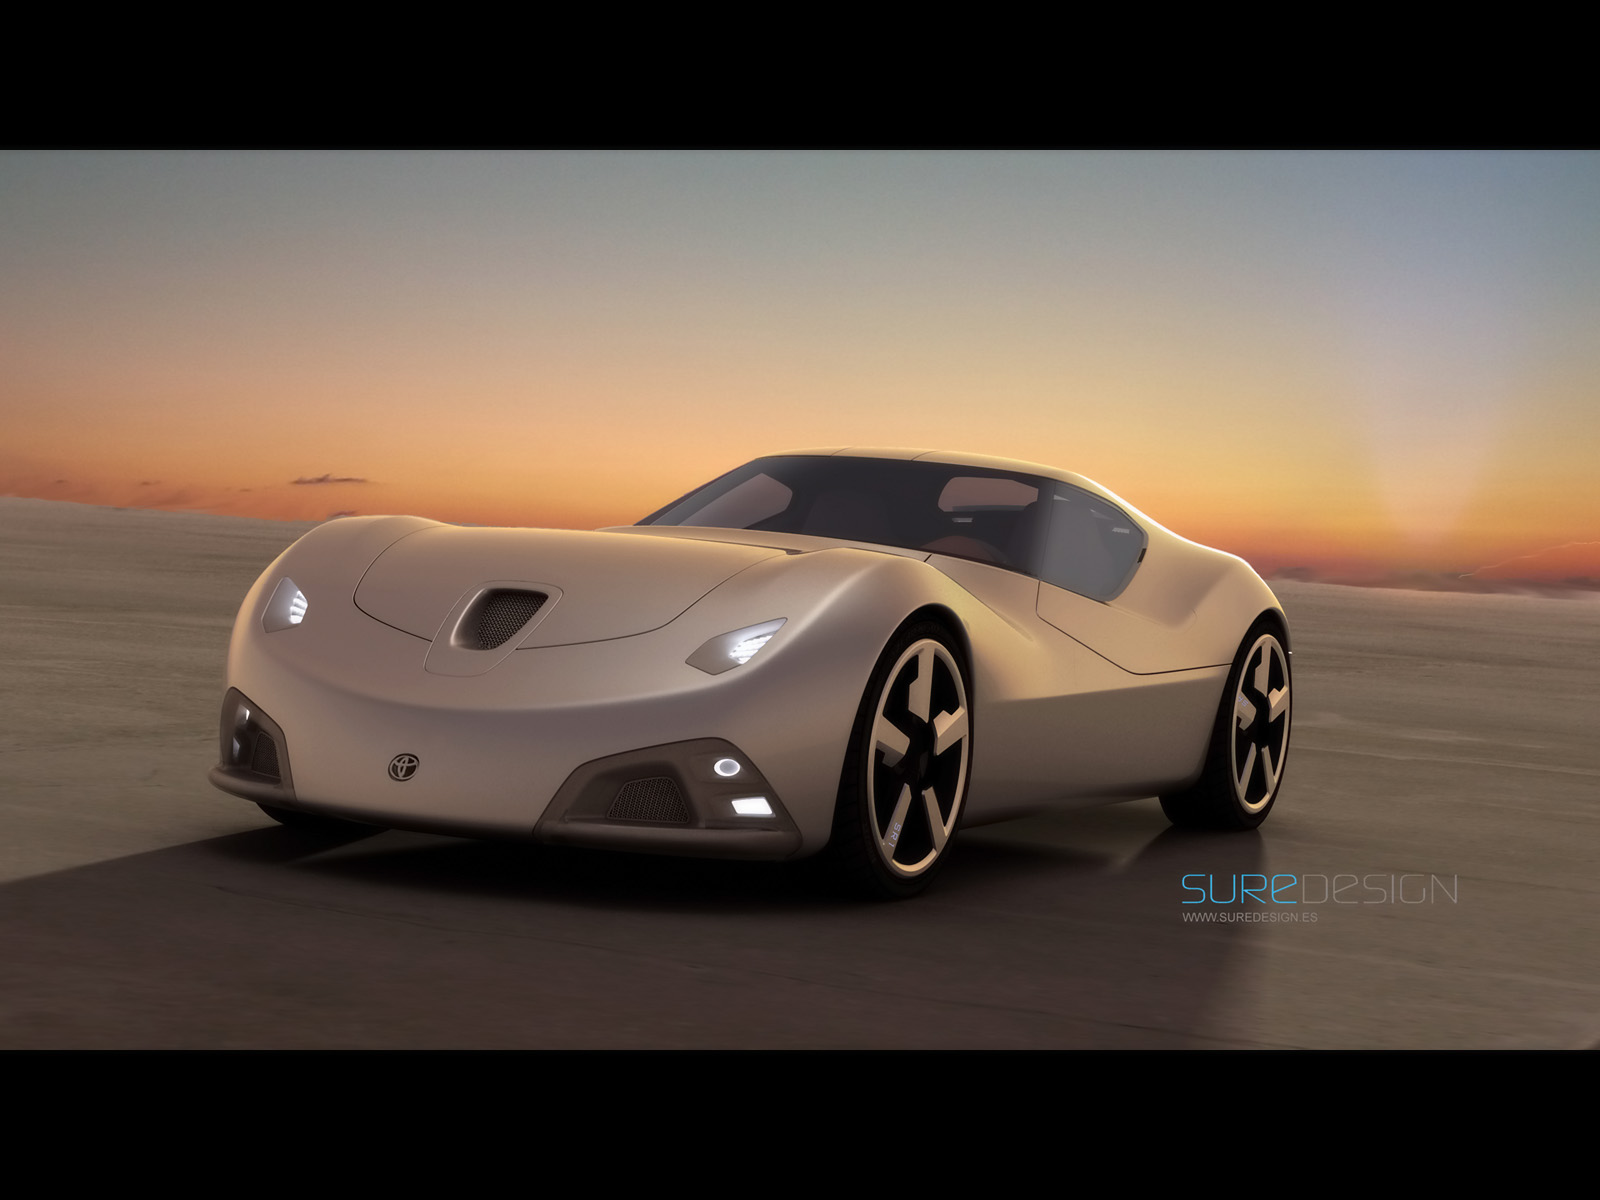 Top 20 Best Toyota Cars Wallpapers Gallery   Original Preview   PIC